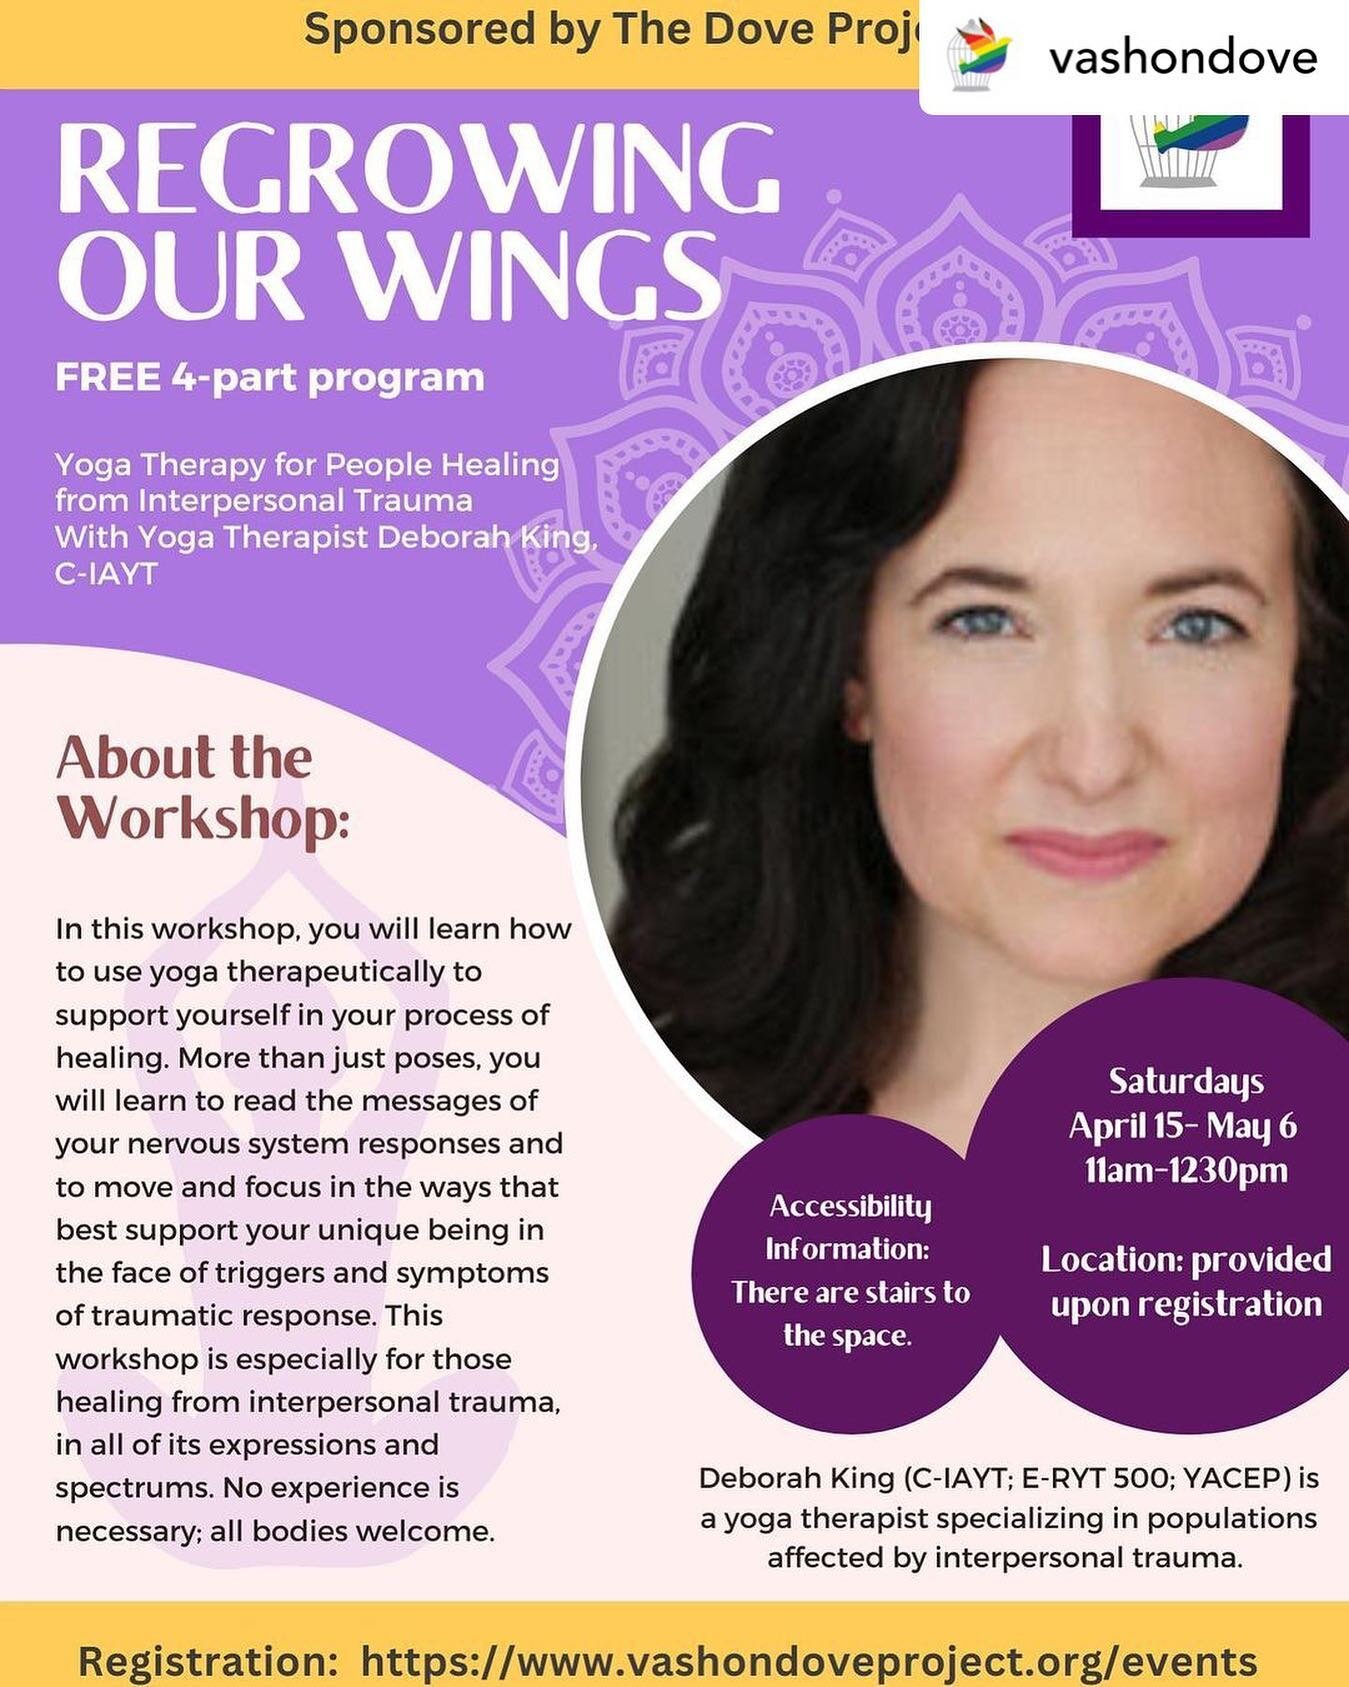 Hi loves, we are onto a waitlist!- and due to high demand asking that folks commit to all 4 sessions. If you are interested, do get on the waitlist early 💜  REGROWING OUR WINGS: Yoga Therapy for People Healing from Interpersonal Trauma

With Yoga Th